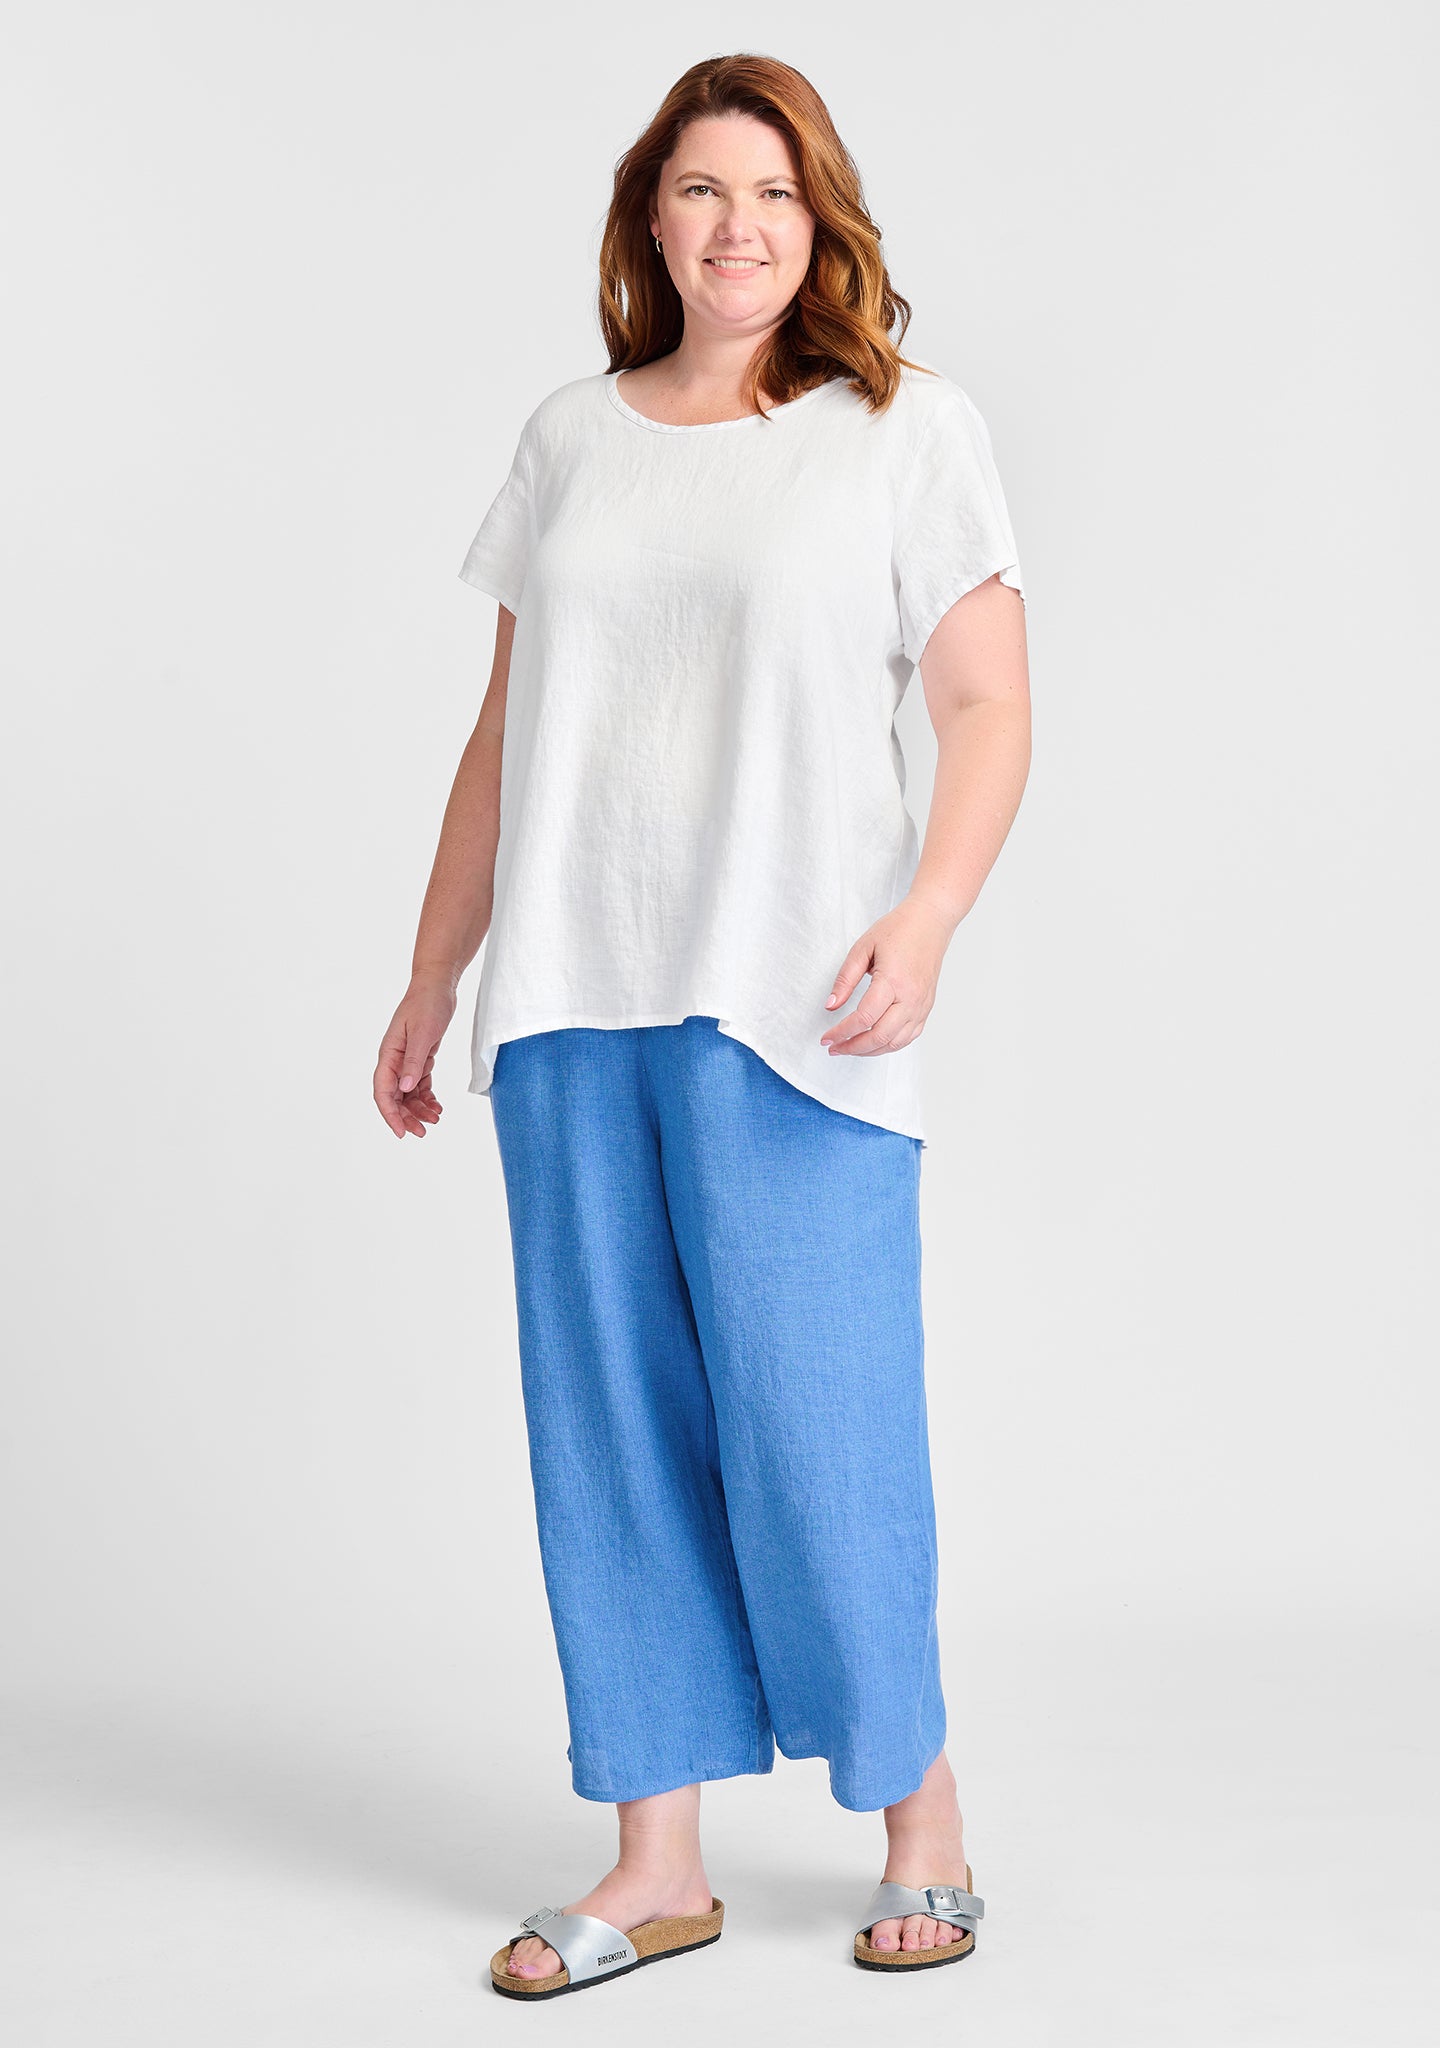 FLAX linen shirt in white with linen pants in blue